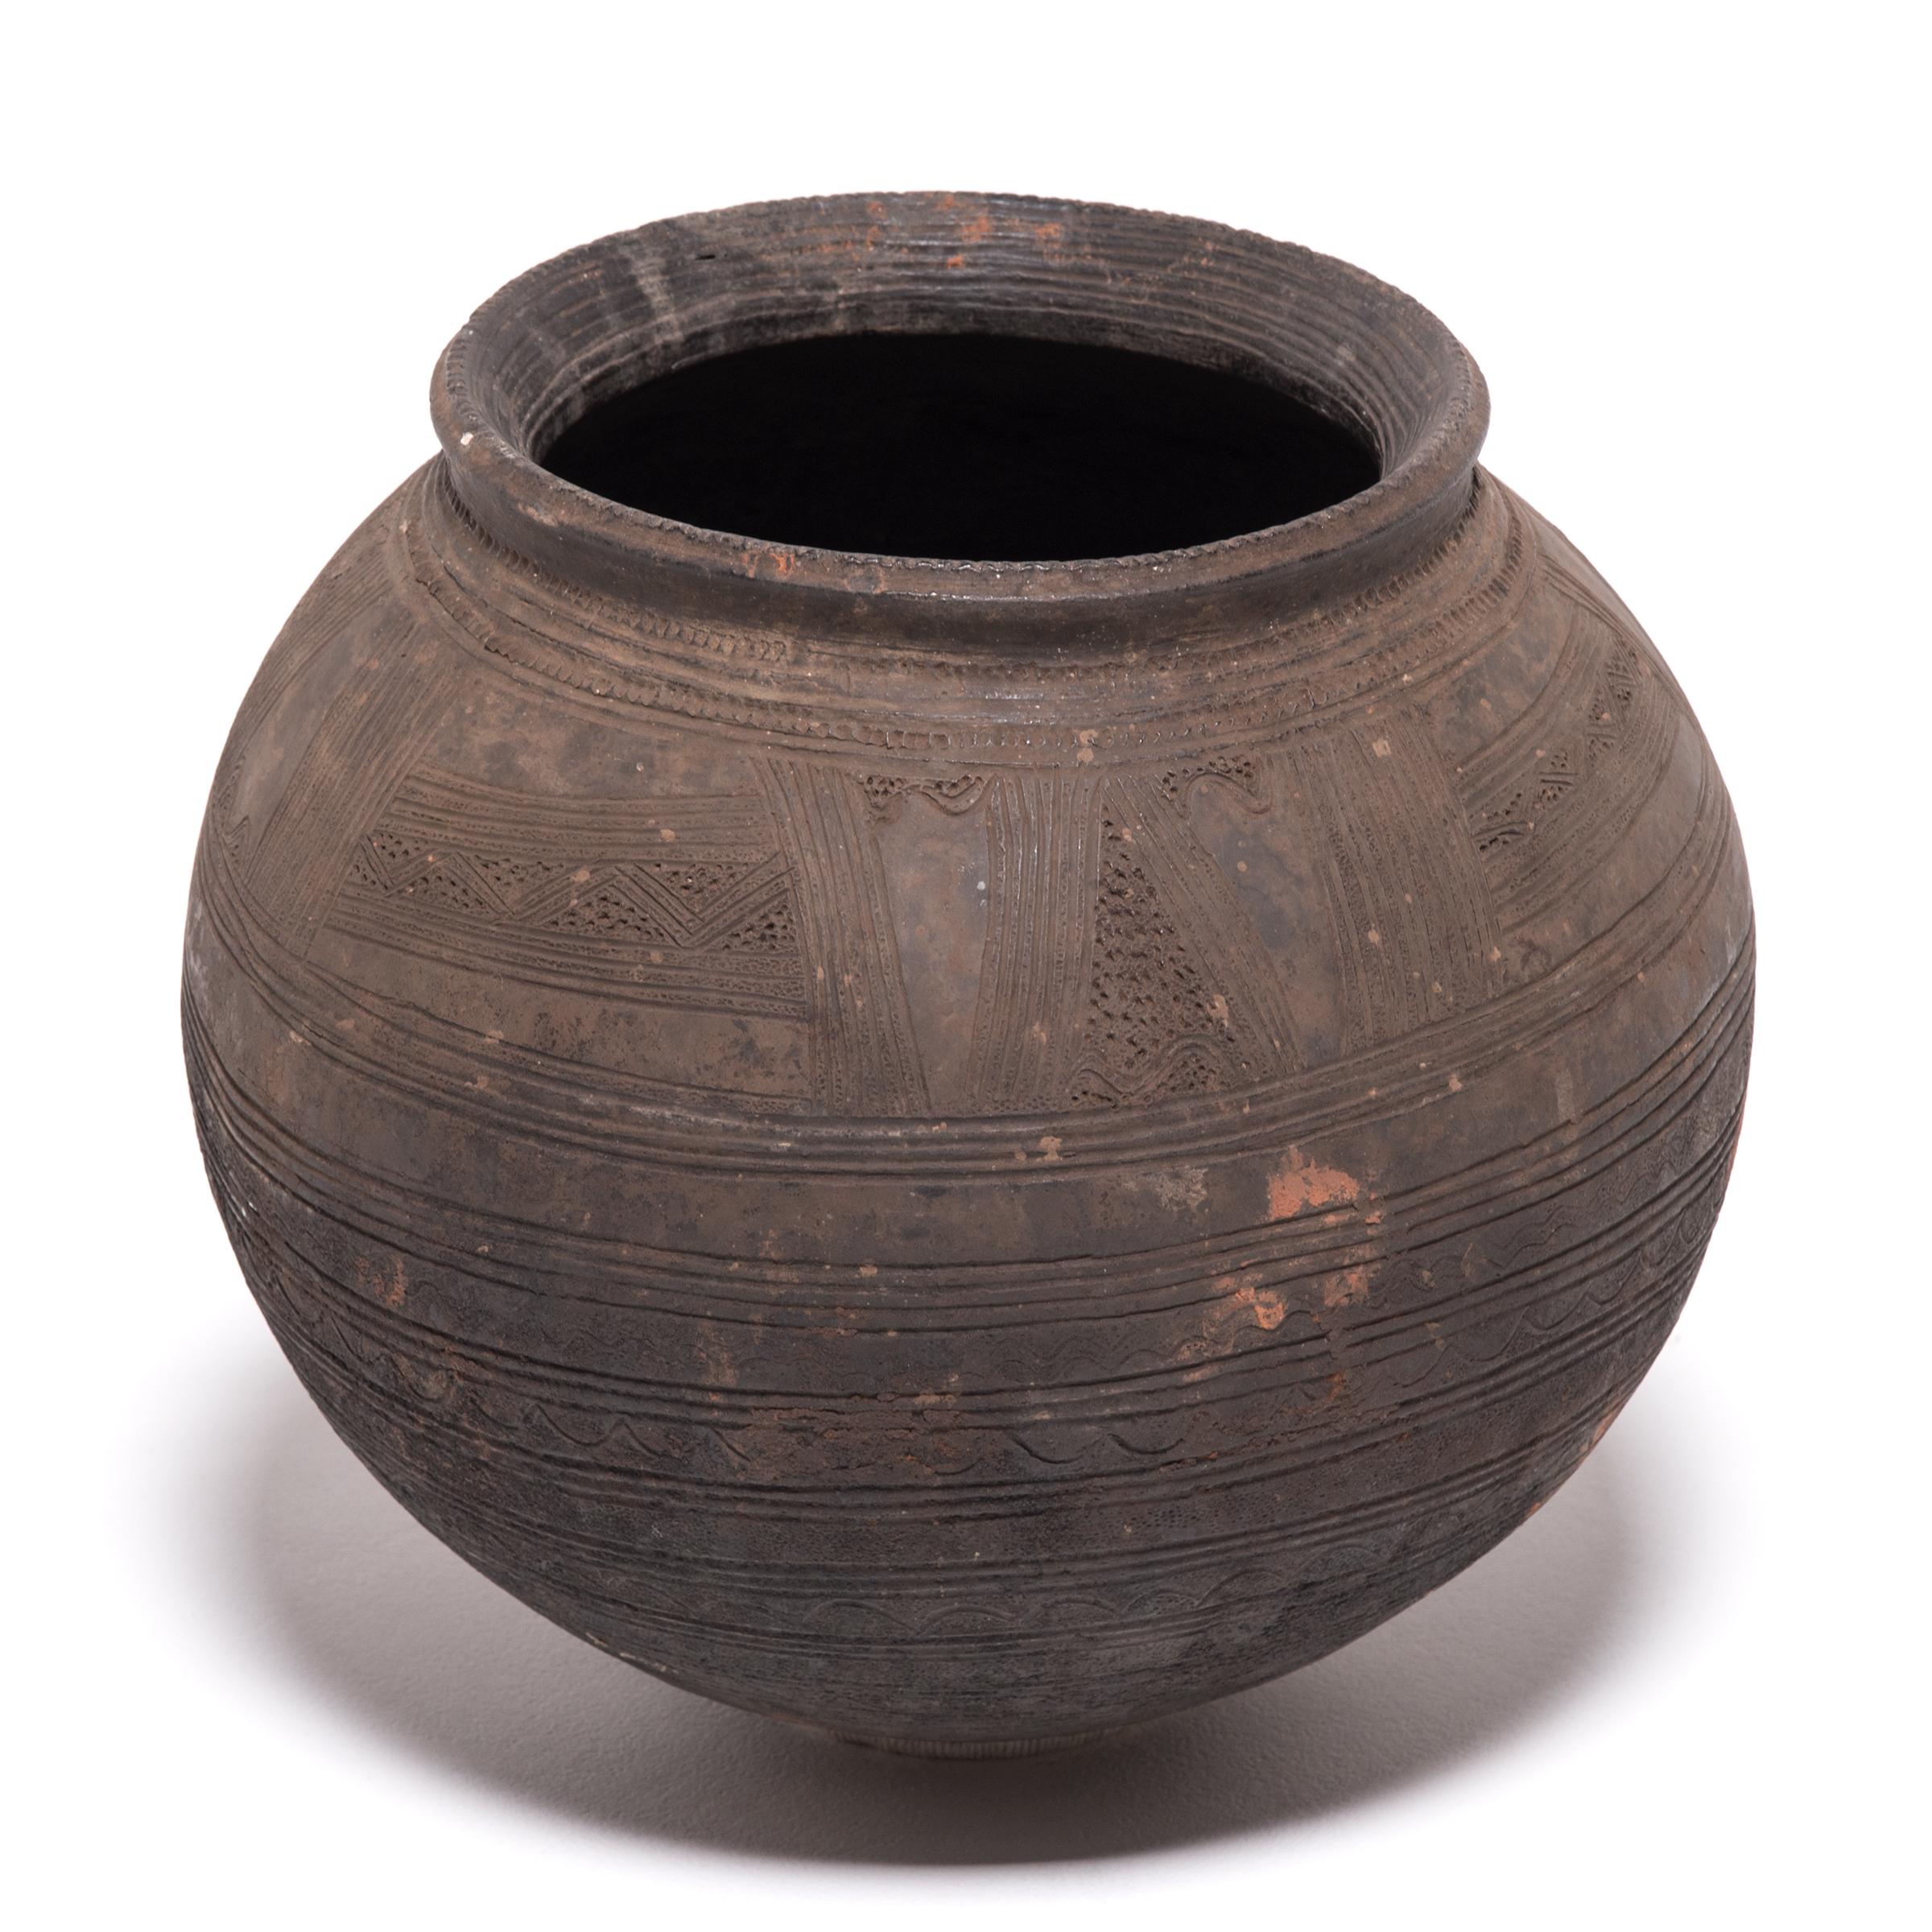 African pottery is revered for combining a simplicity of form with astonishing beauty and sophistication. Even an everyday object, like this water vessel, is richly balanced and deep in character. The vessel's varied textures come from its